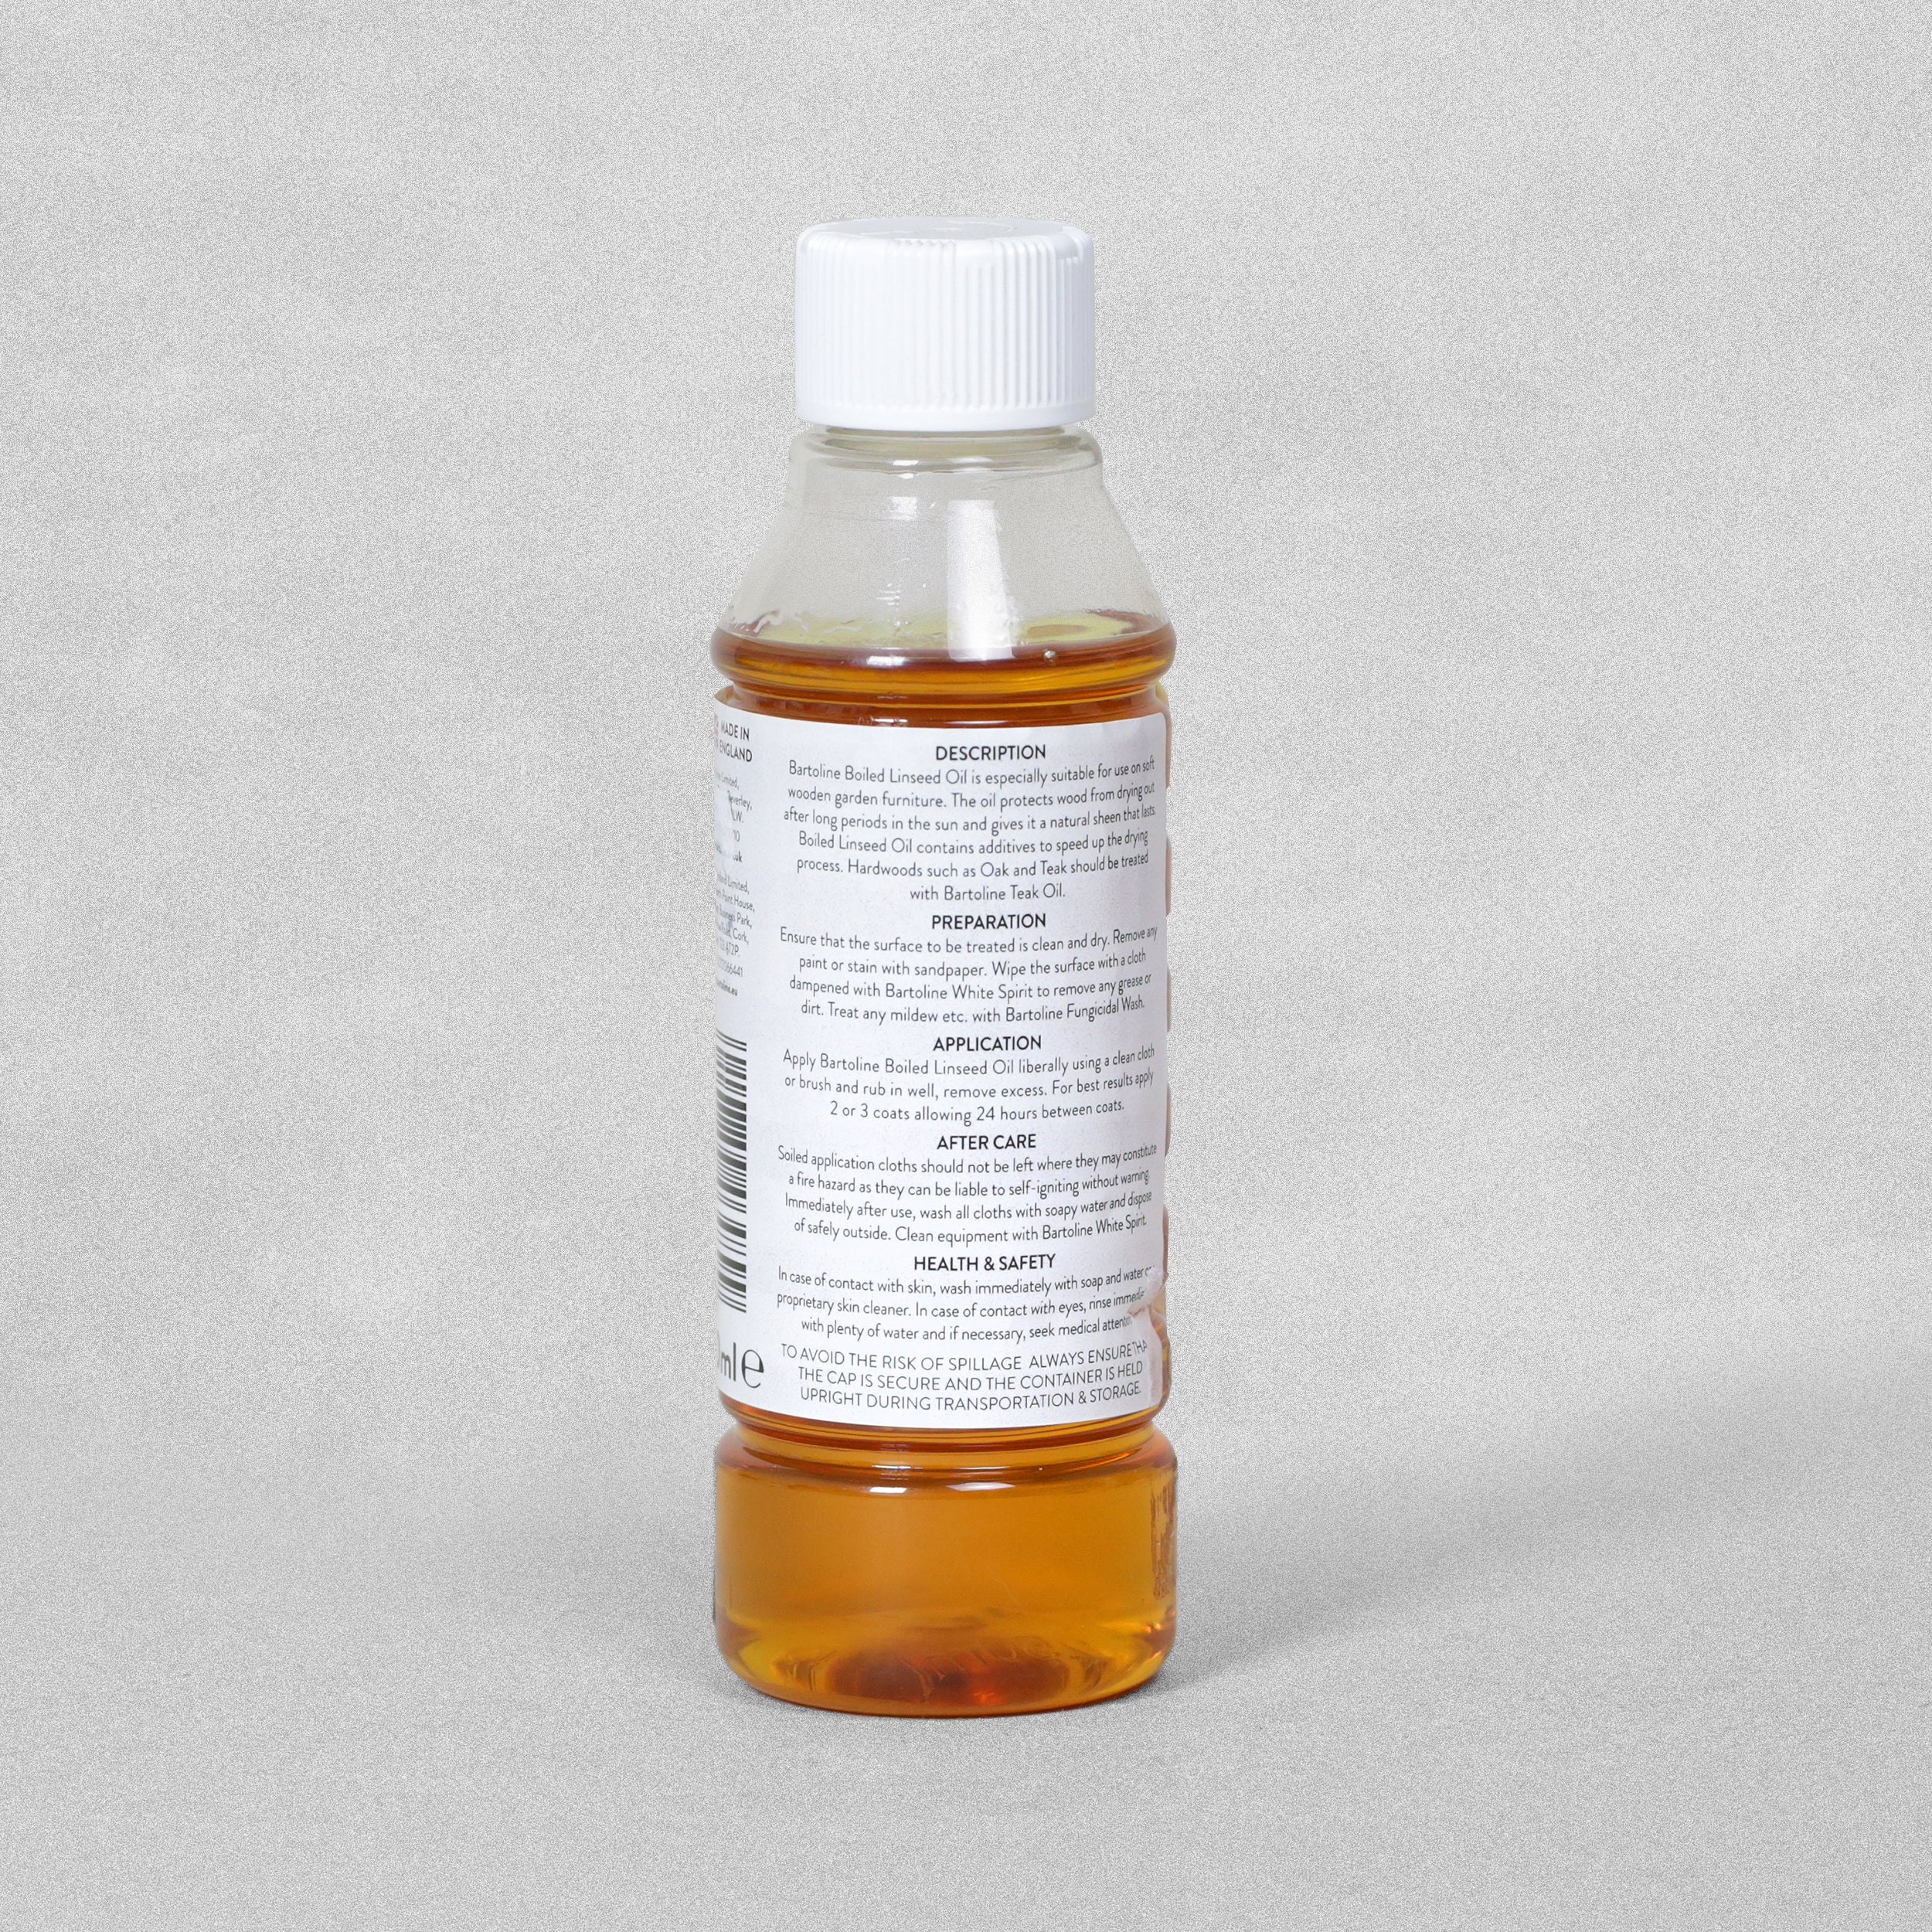 Bartoline Natural Oil Replacement Boiled Linseed Oil - 250ml